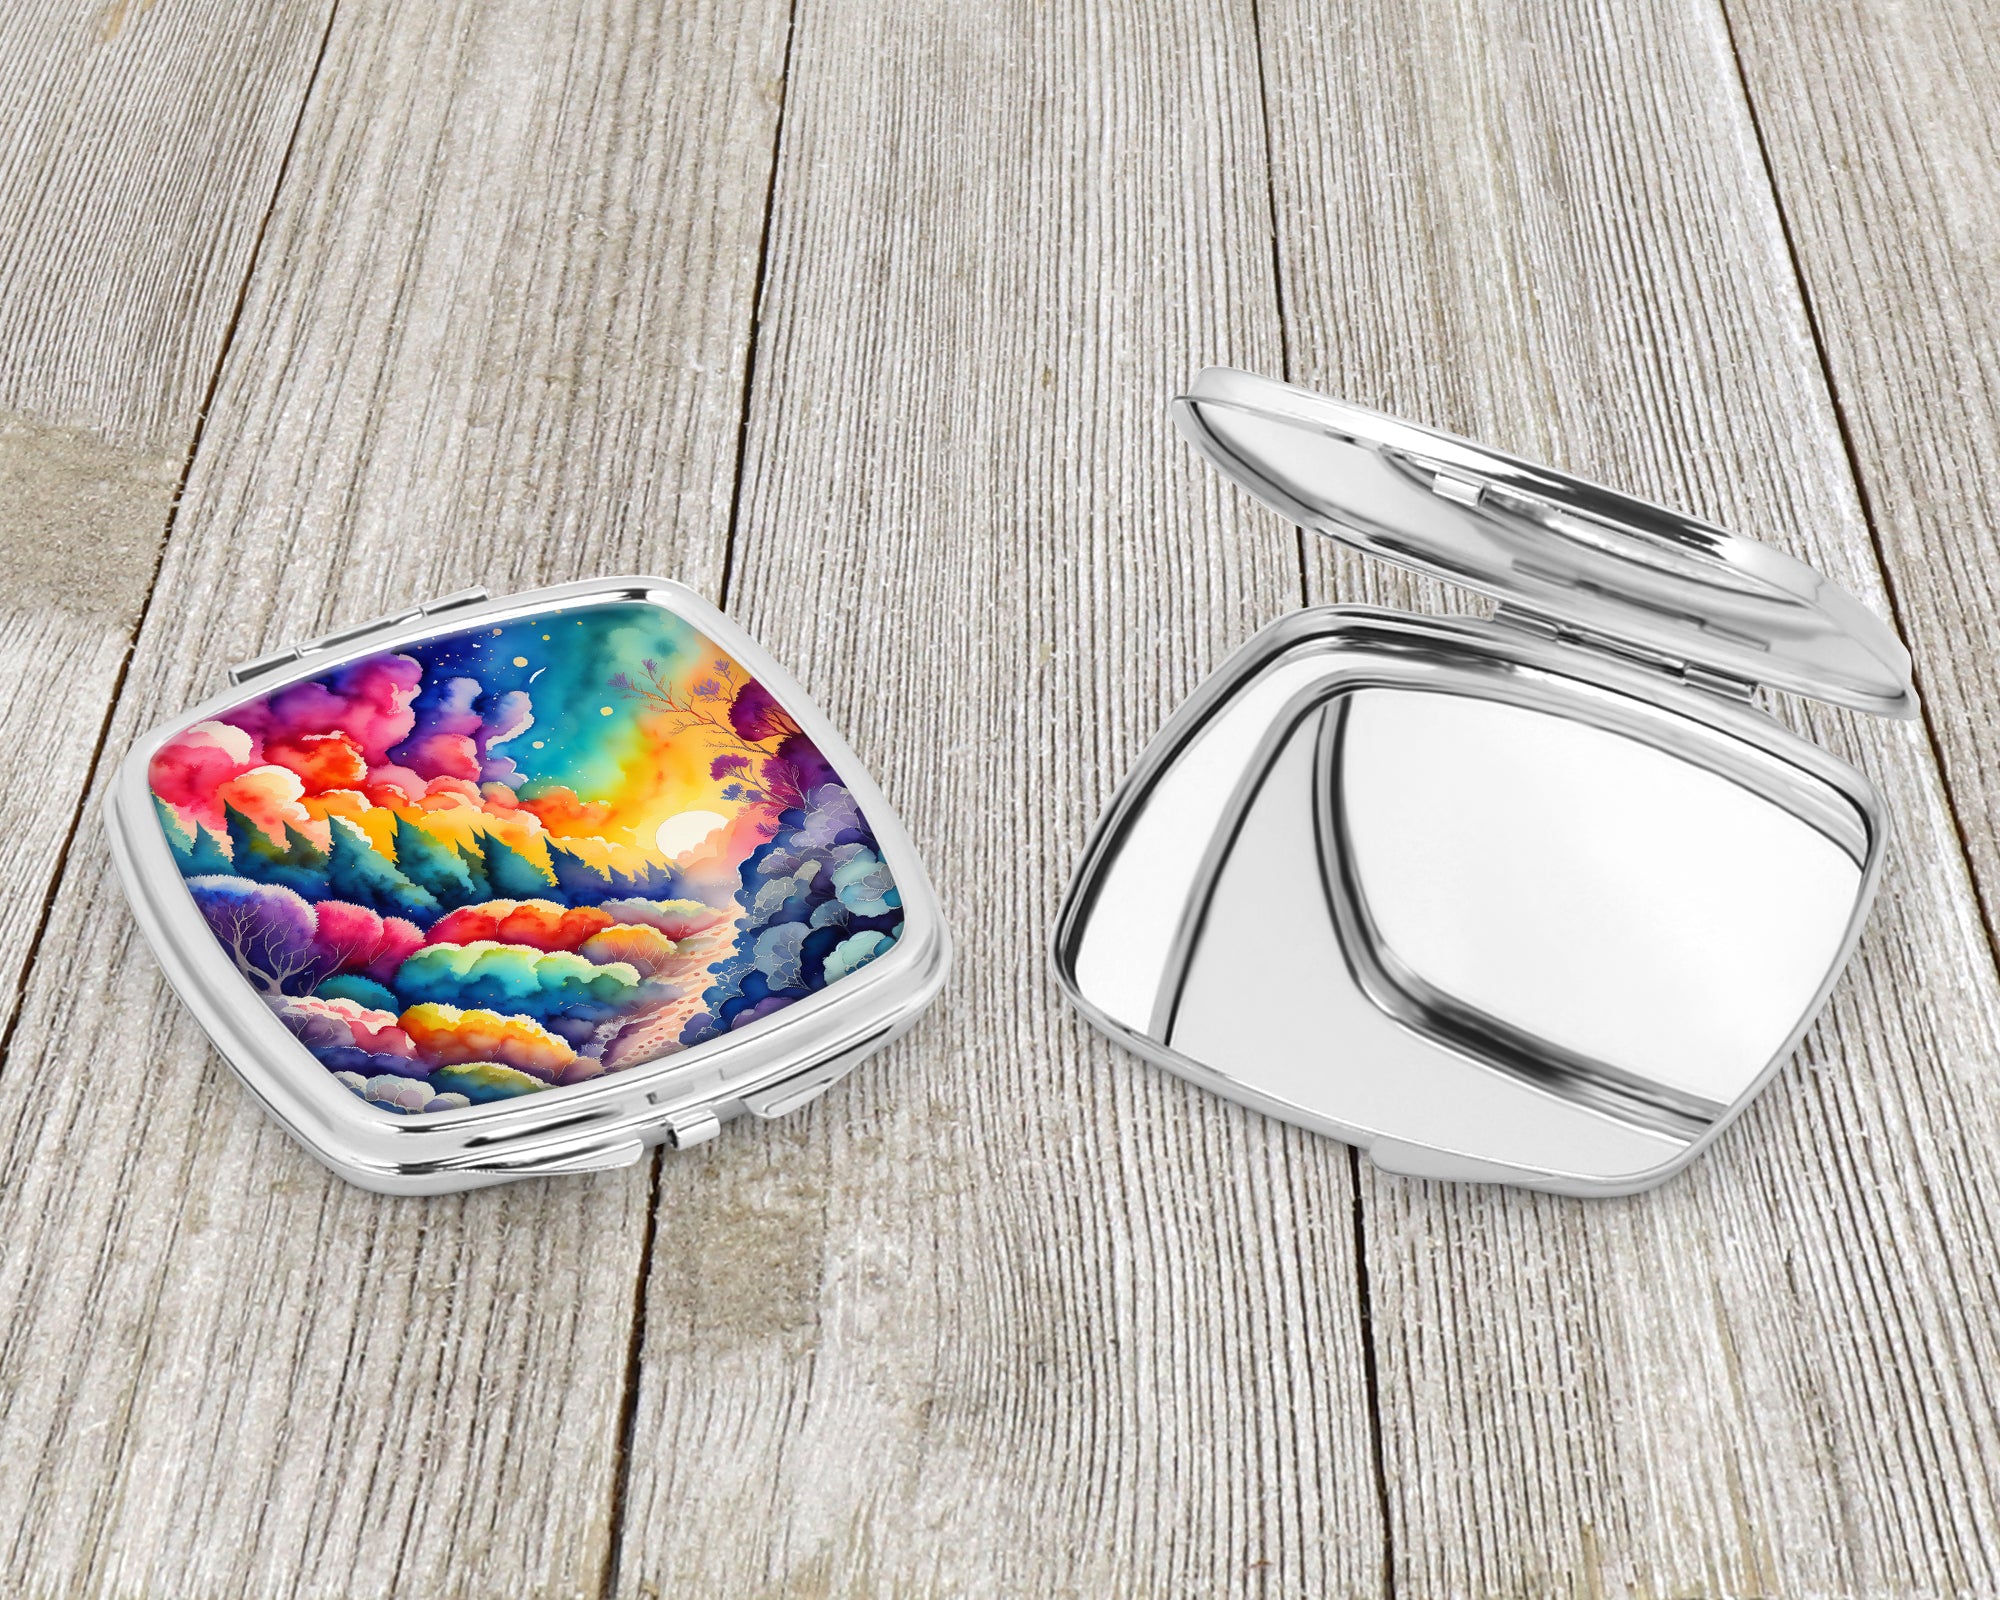 Colorful Dusty Miller Compact Mirror